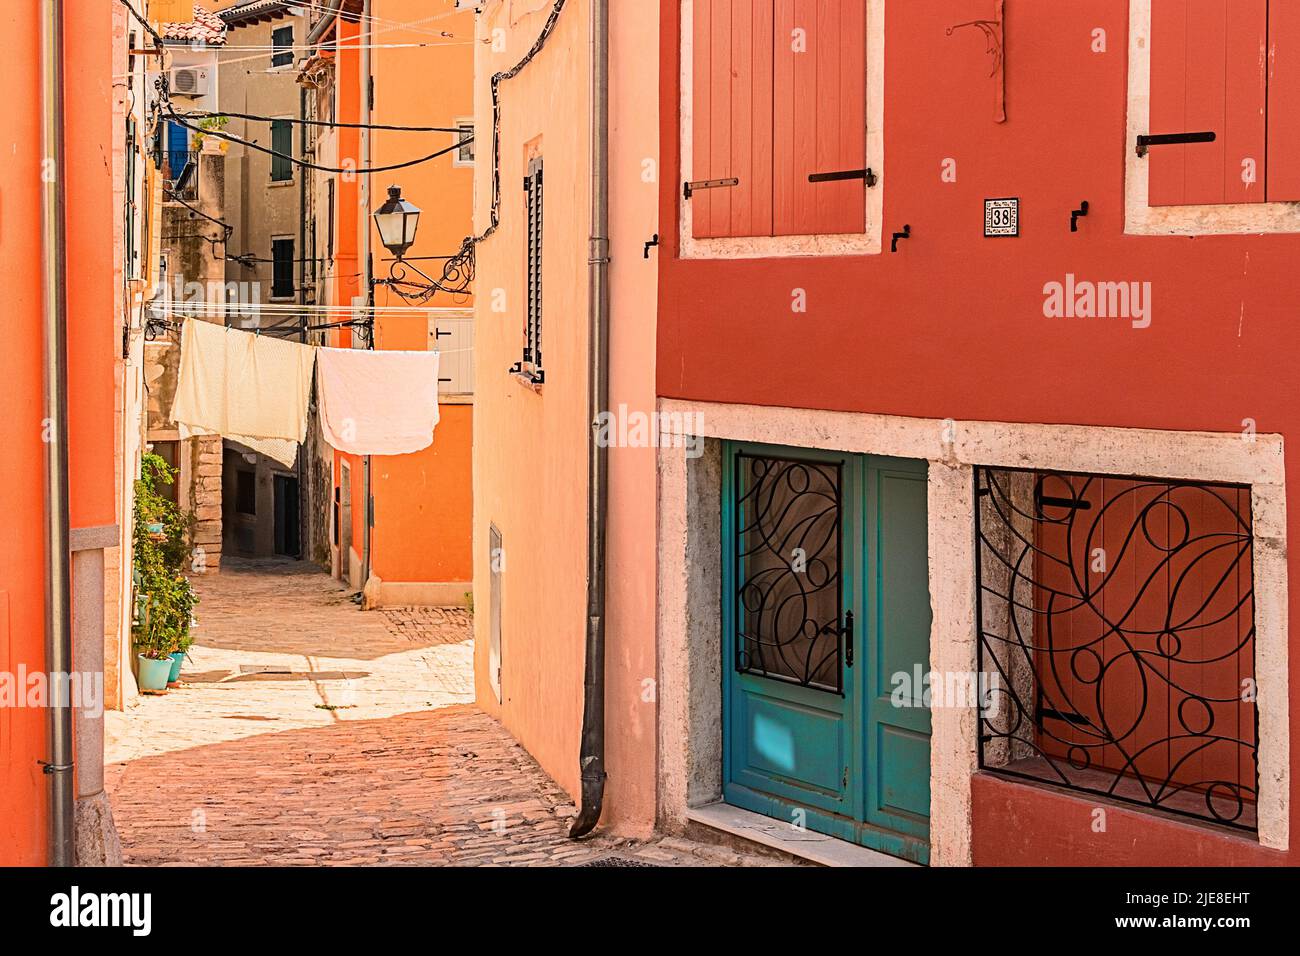 One of the small alleys in the old, colorful Mediterranean town of Rovinj, Croatia. Stock Photo